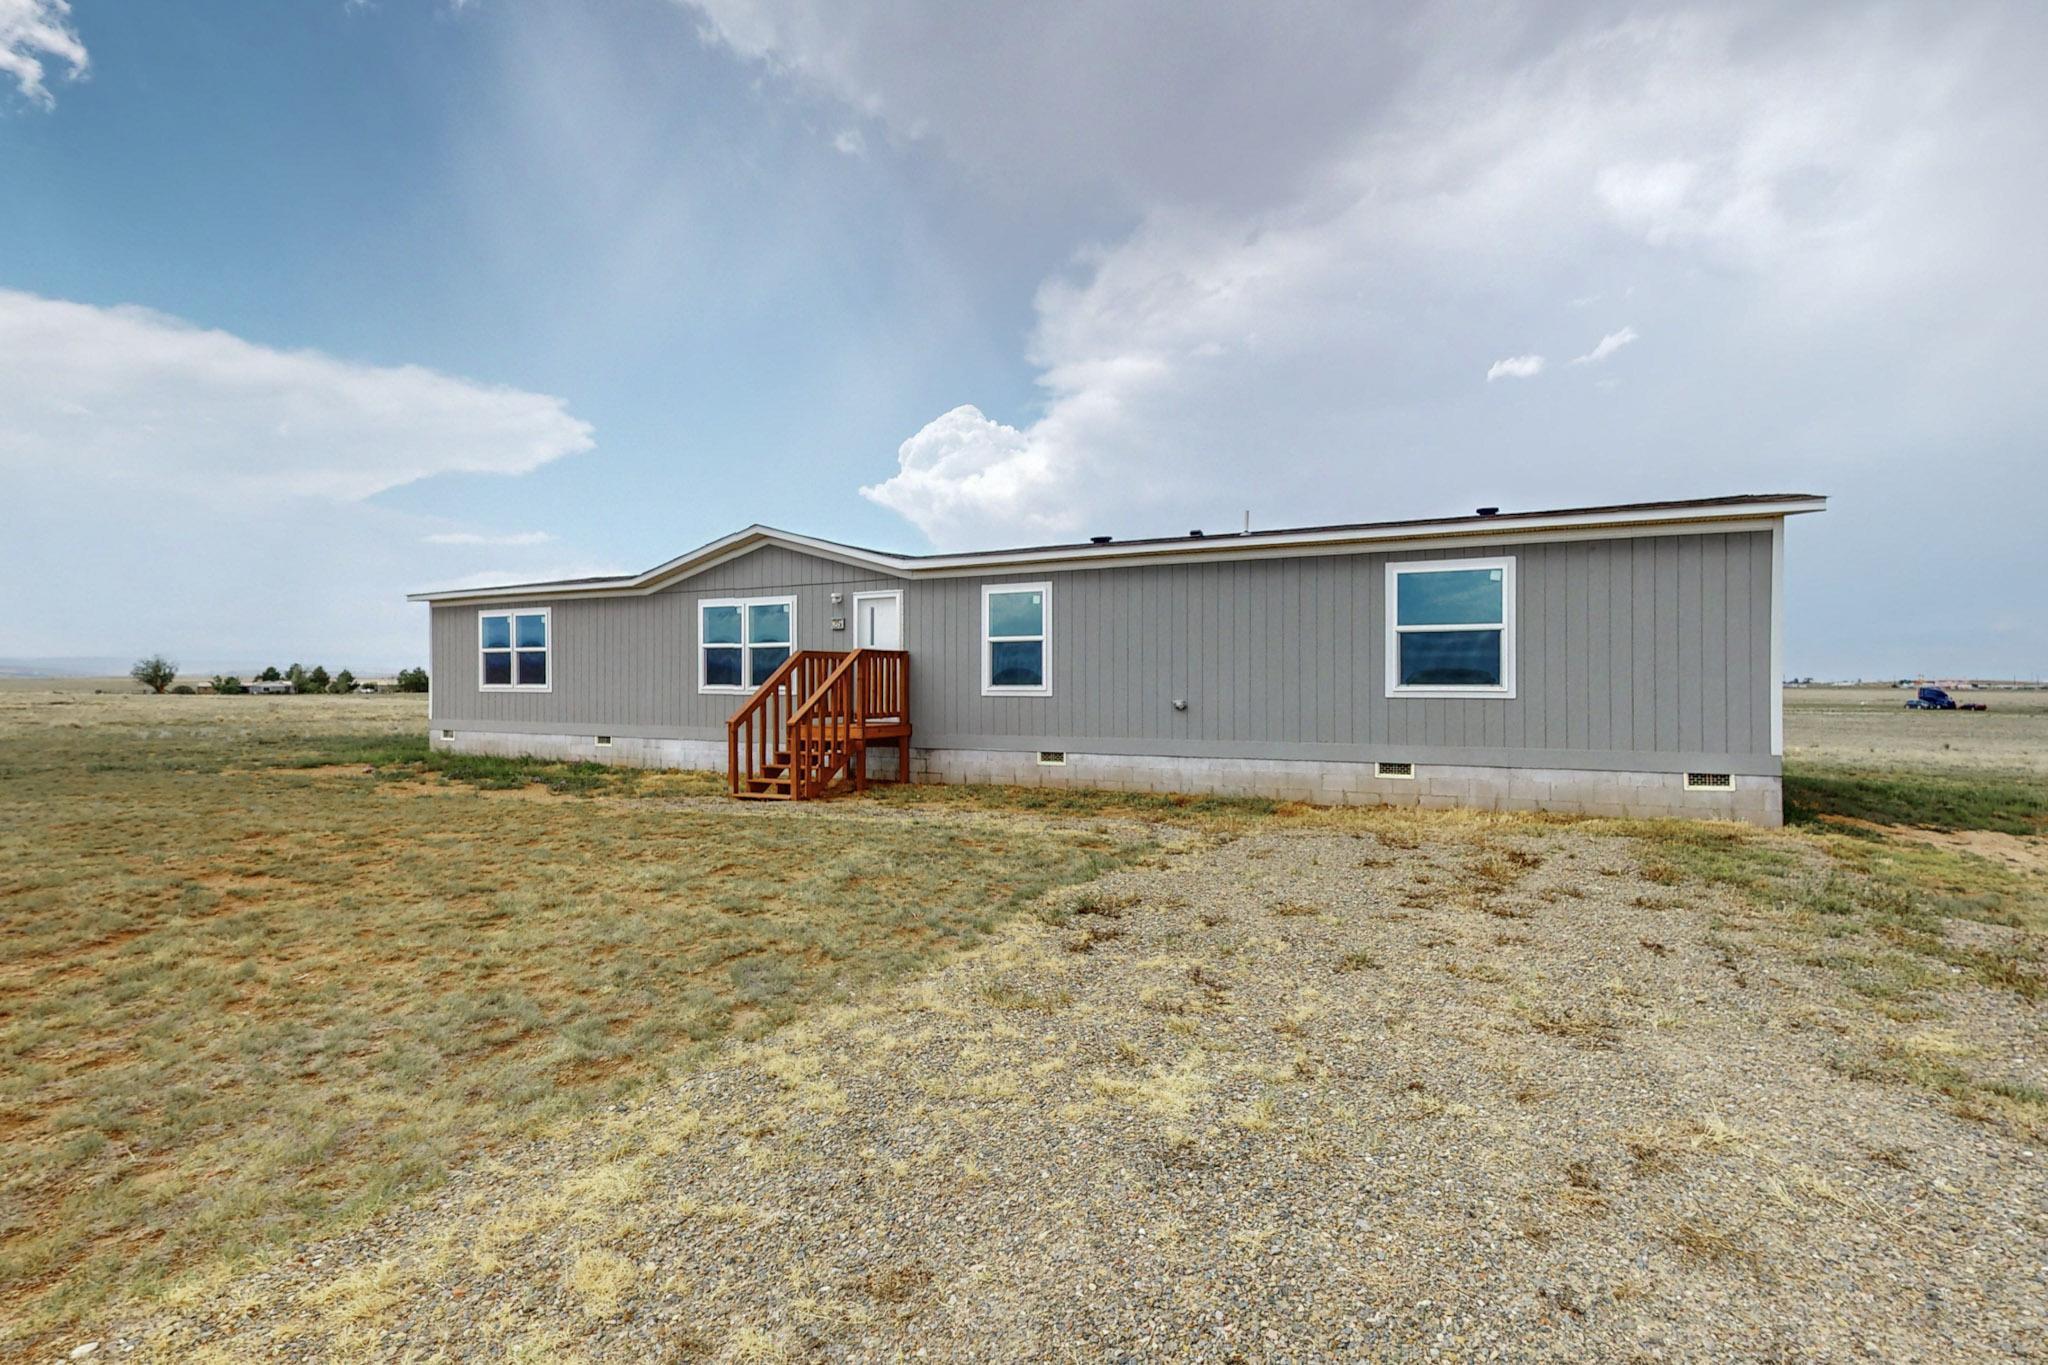 25 Scarlet Ohara, Moriarty, New Mexico 87035, 4 Bedrooms Bedrooms, ,2 BathroomsBathrooms,Residential,For Sale,25 Scarlet Ohara,1054682